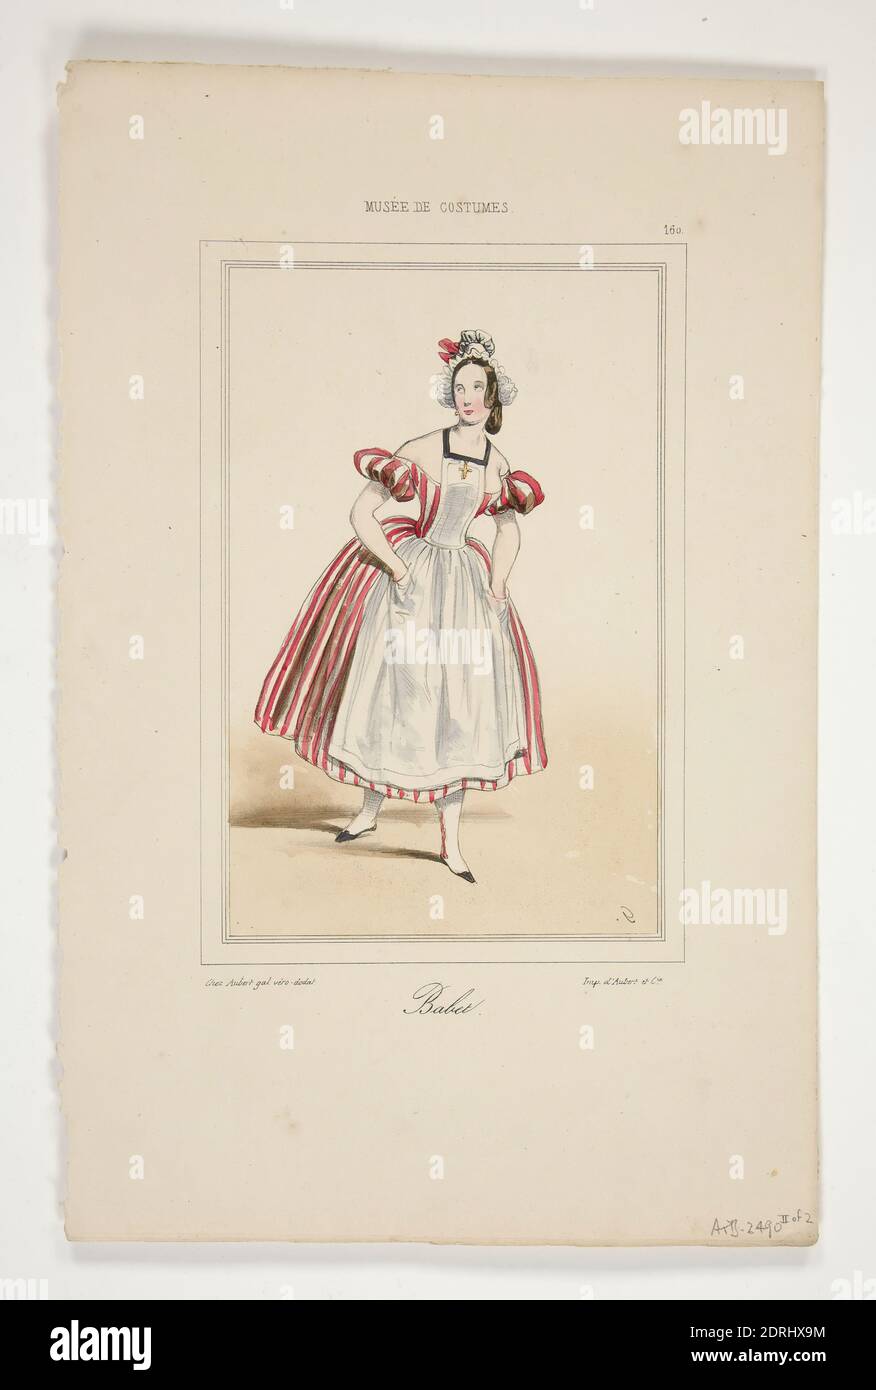 Artist: Paul Gavarni, French, 1804–1866, BABET., Lithograph, colored, French, 19th century, Works on Paper - Prints Stock Photo